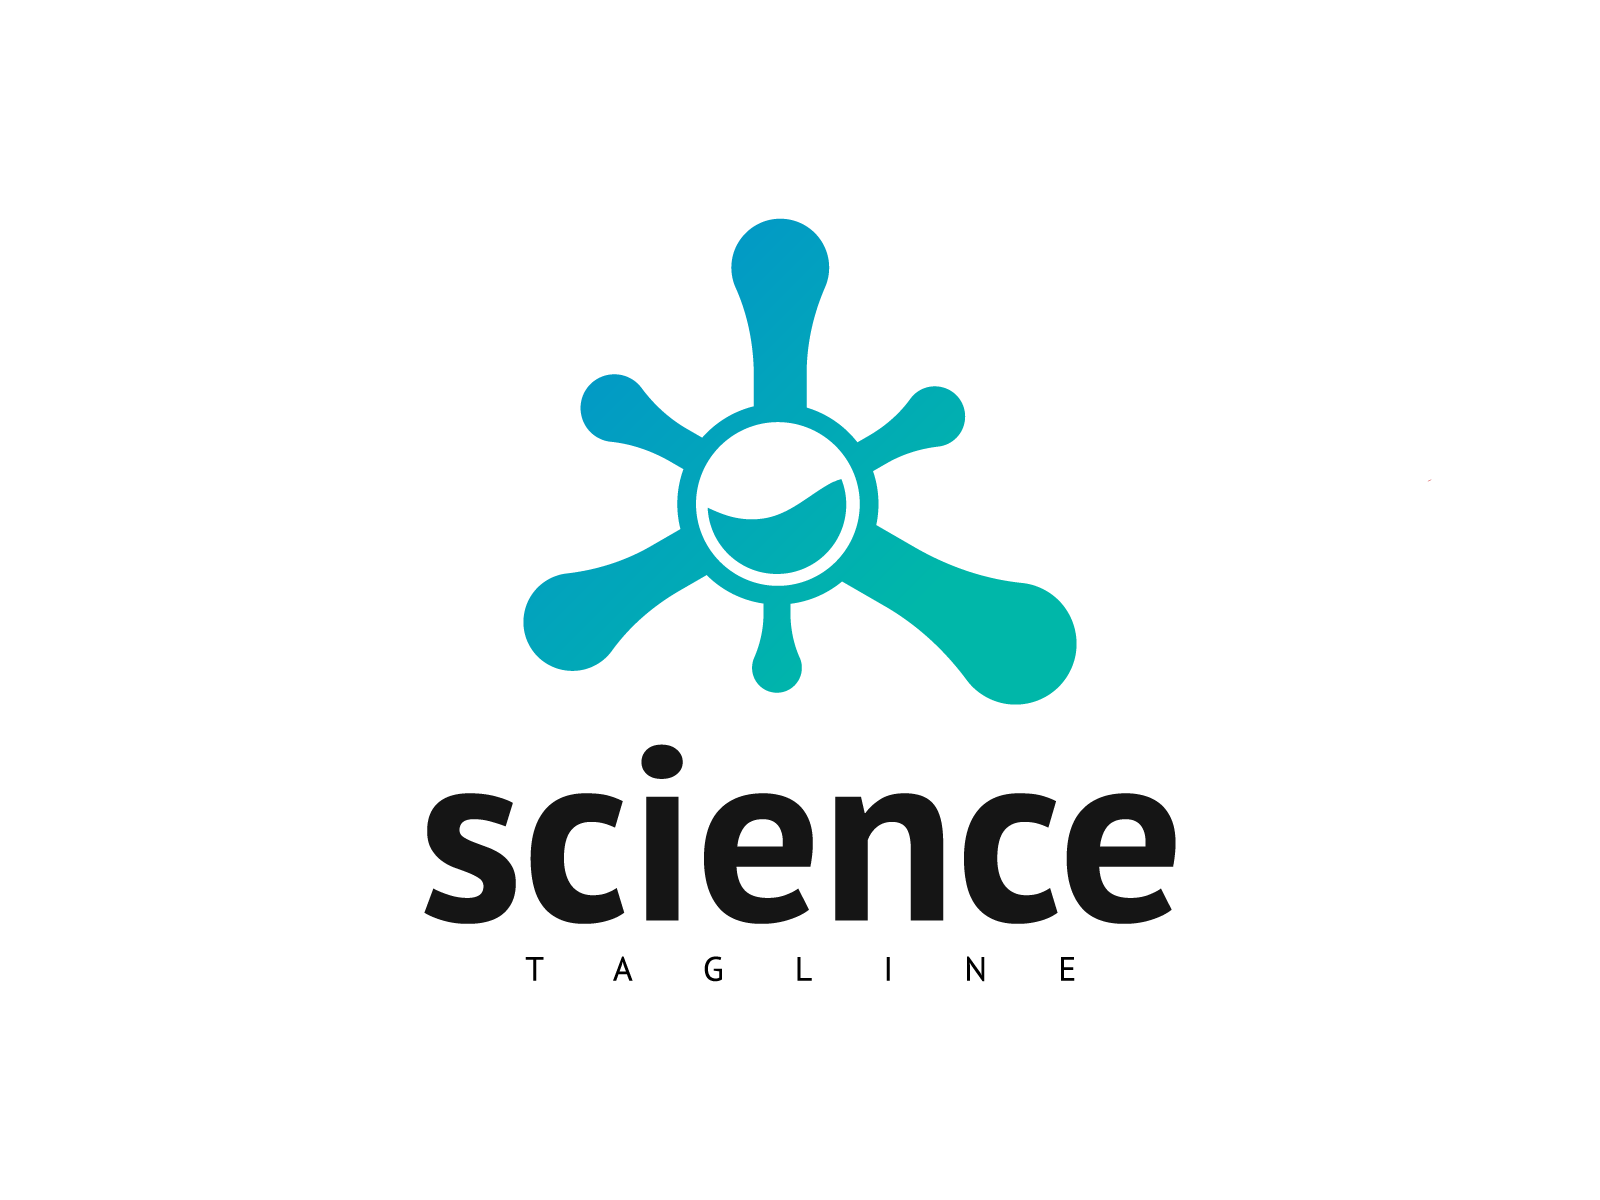 Science Lab Logo Design by Md Mostakim Maruf on Dribbble